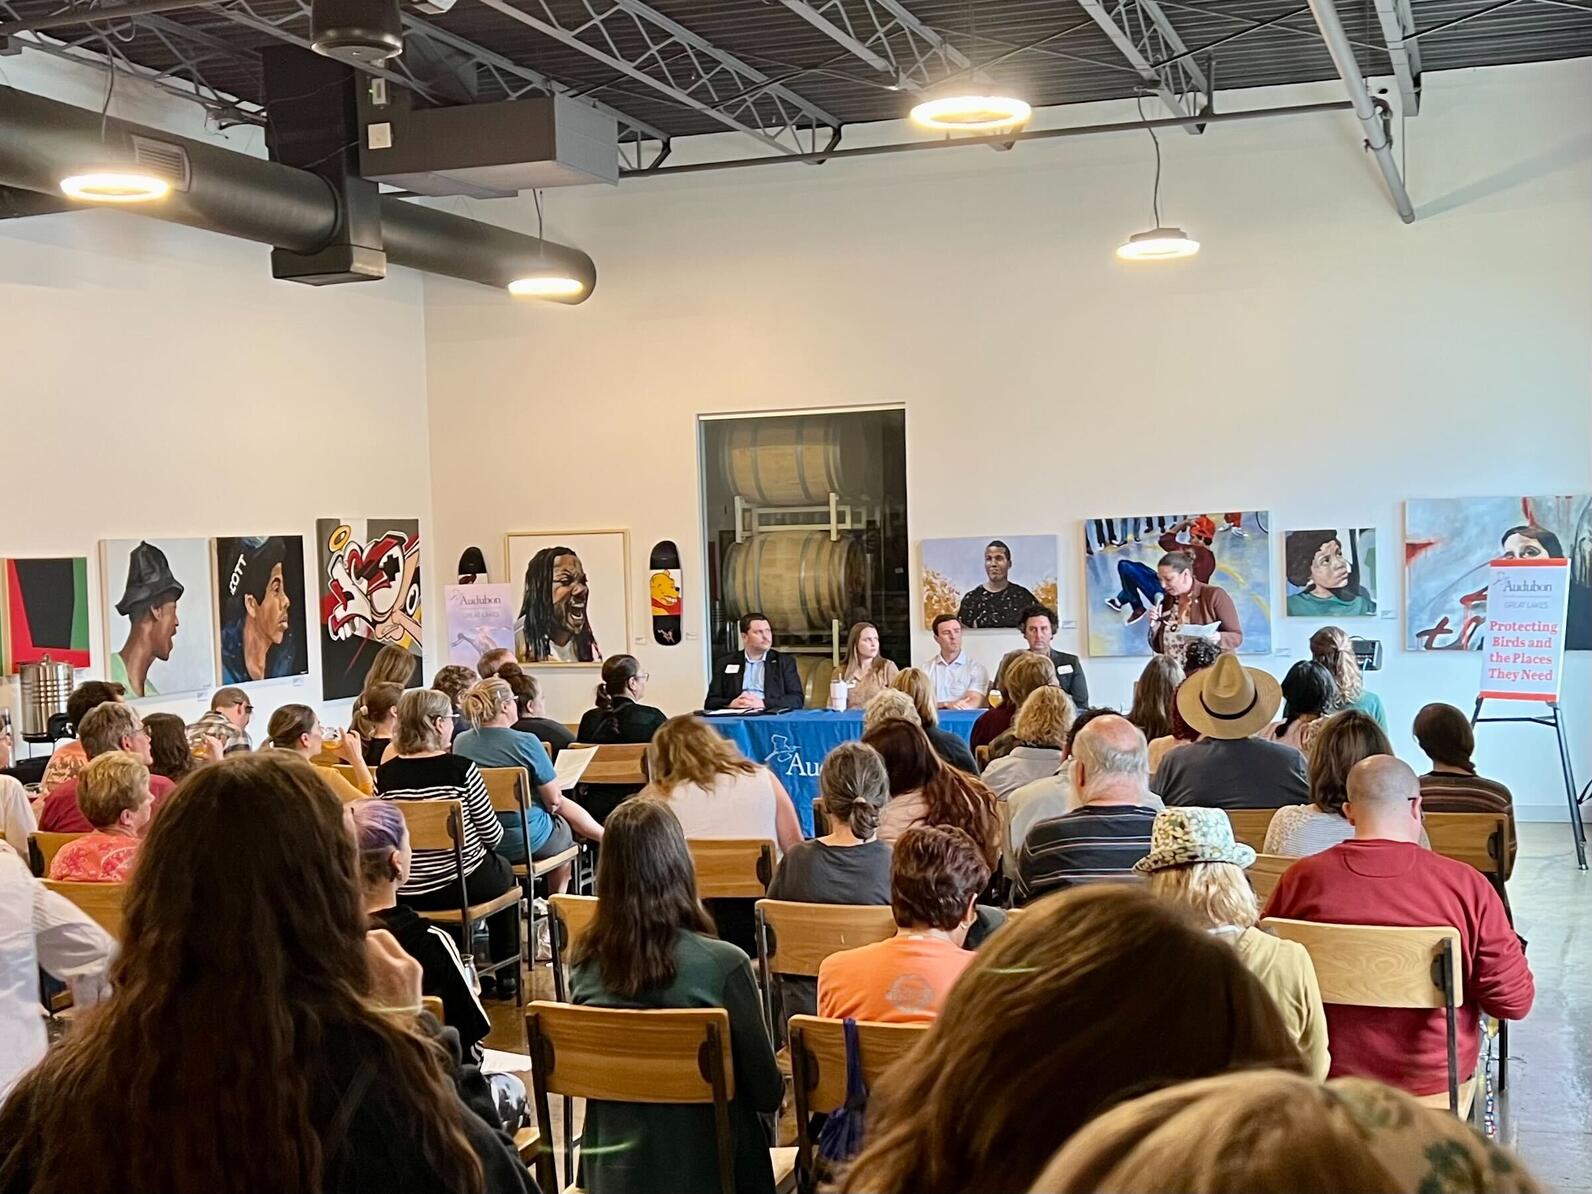 One-hundred Audubon members are seated at Upland FSQ Brewery in Indianapolis for Birds and Brews, facing a table of panelists with art on the wall behind them. Credit: Audubon Great Lakes 